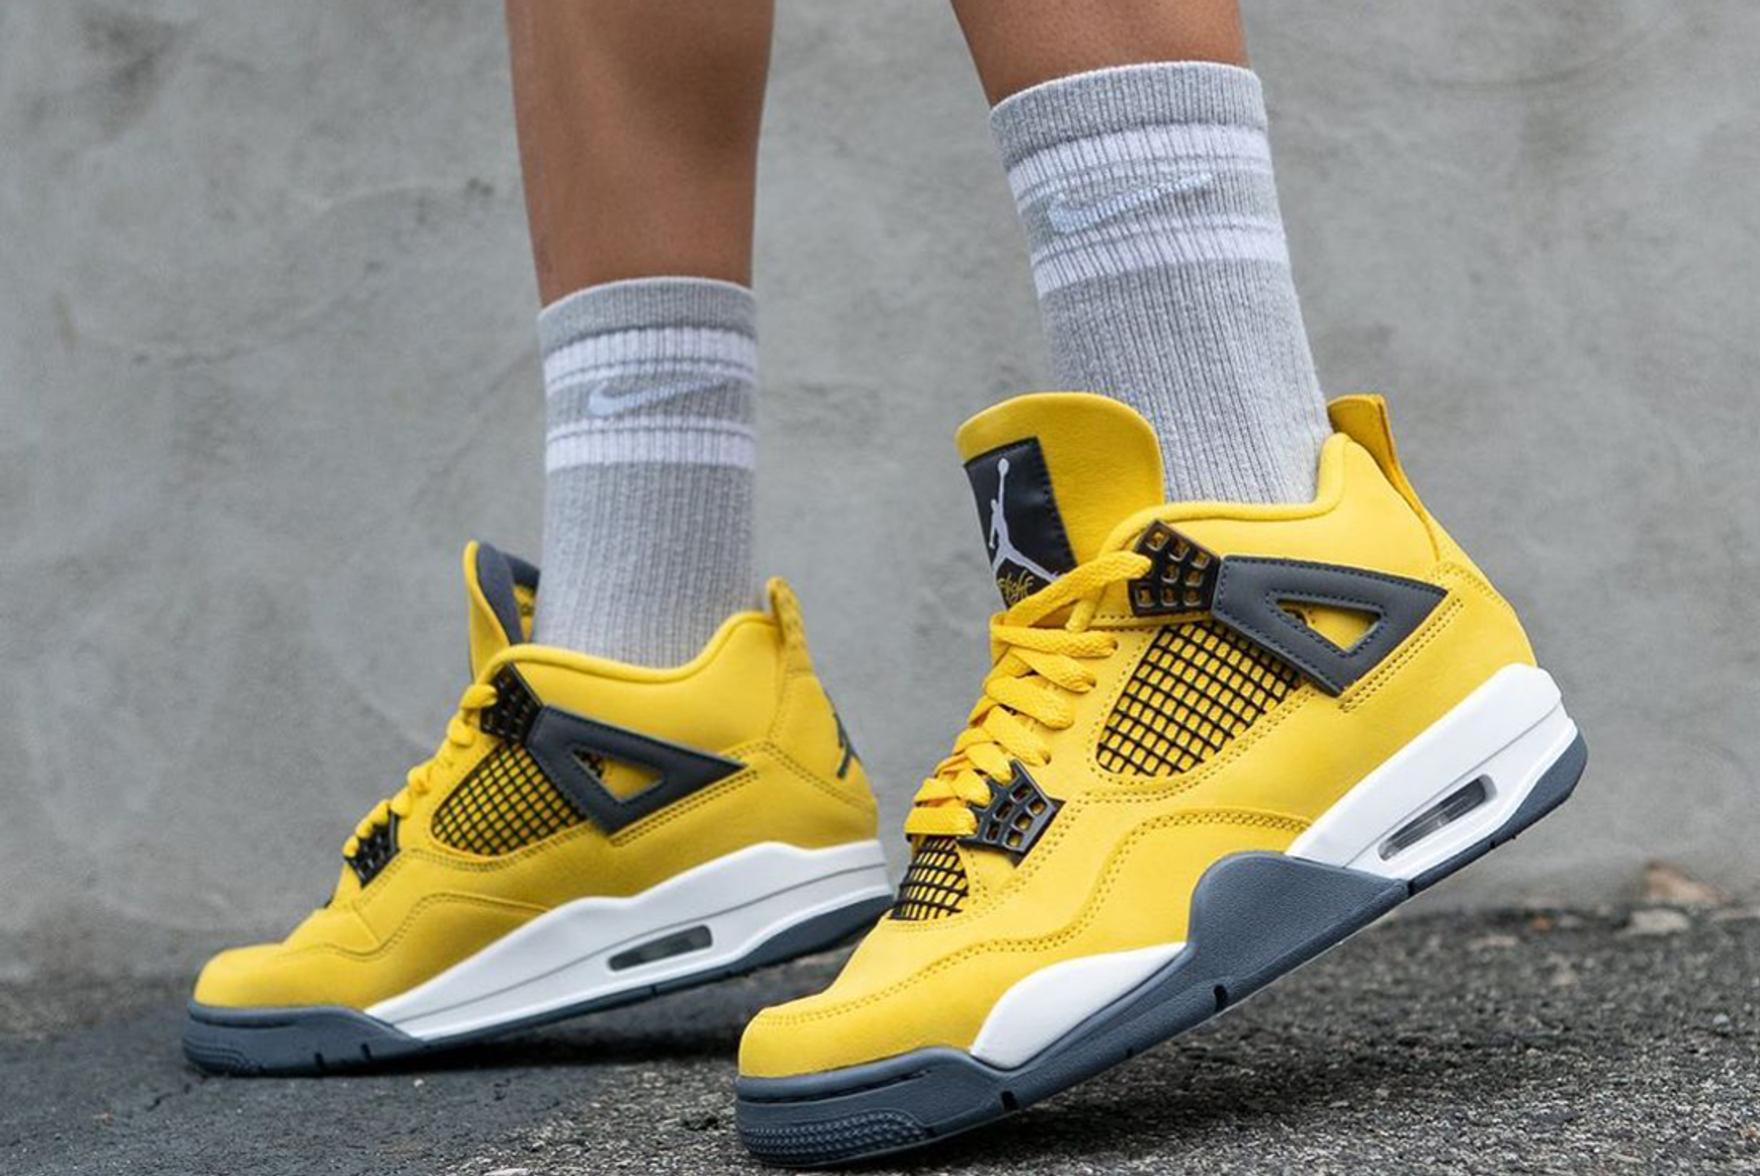 Here’s How People are Styling the Air Jordan 4 ‘Lightning’